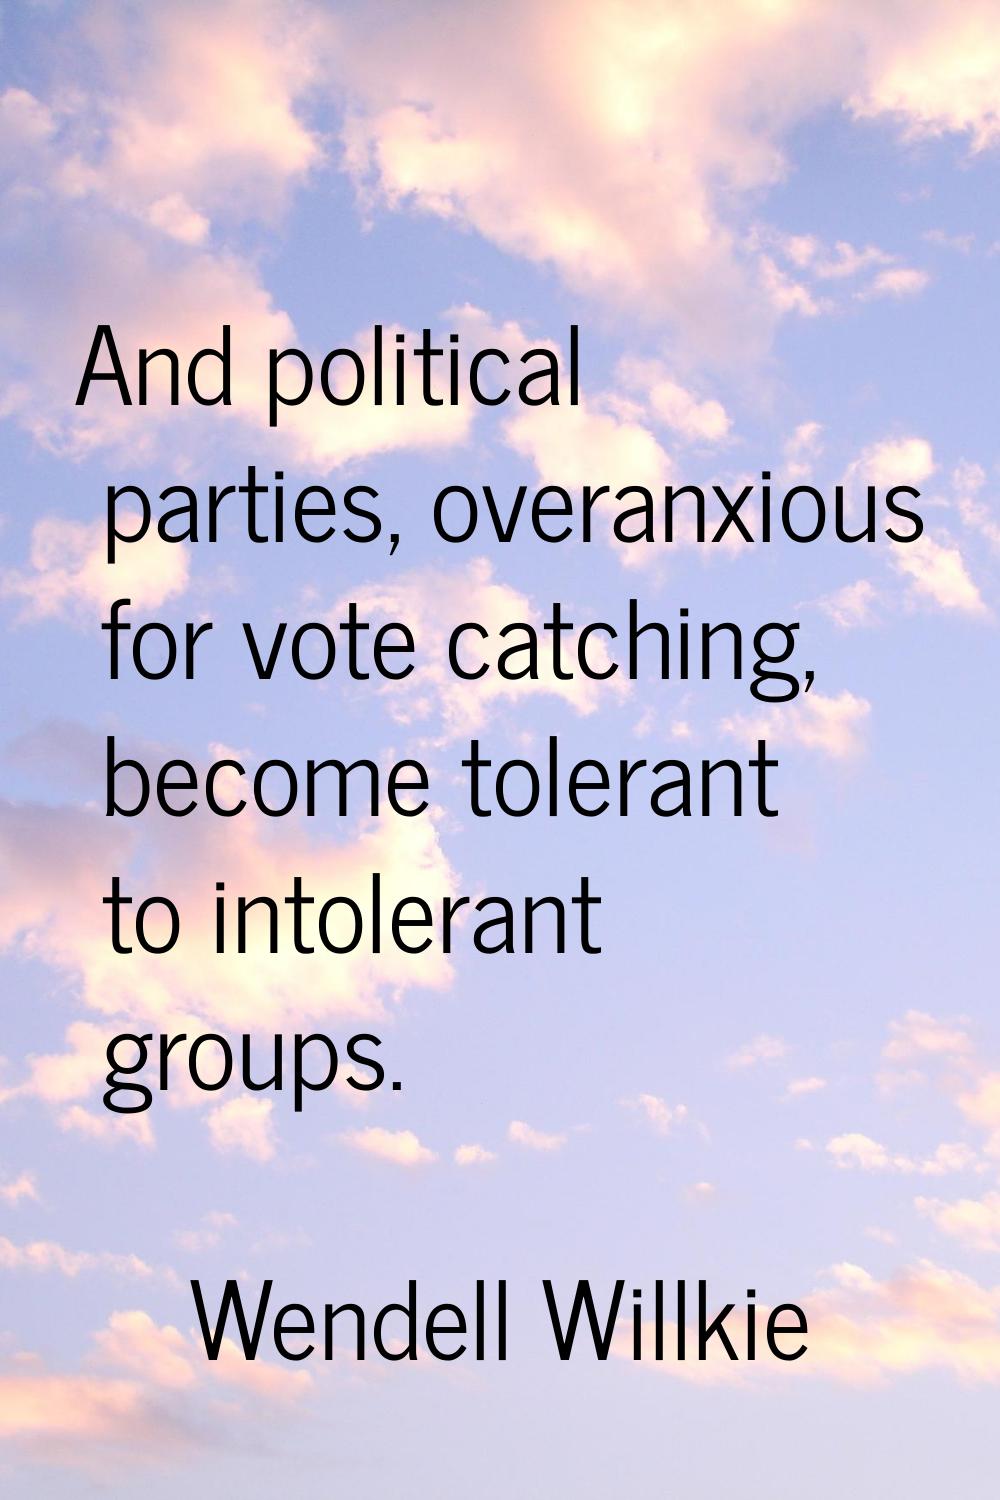 And political parties, overanxious for vote catching, become tolerant to intolerant groups.